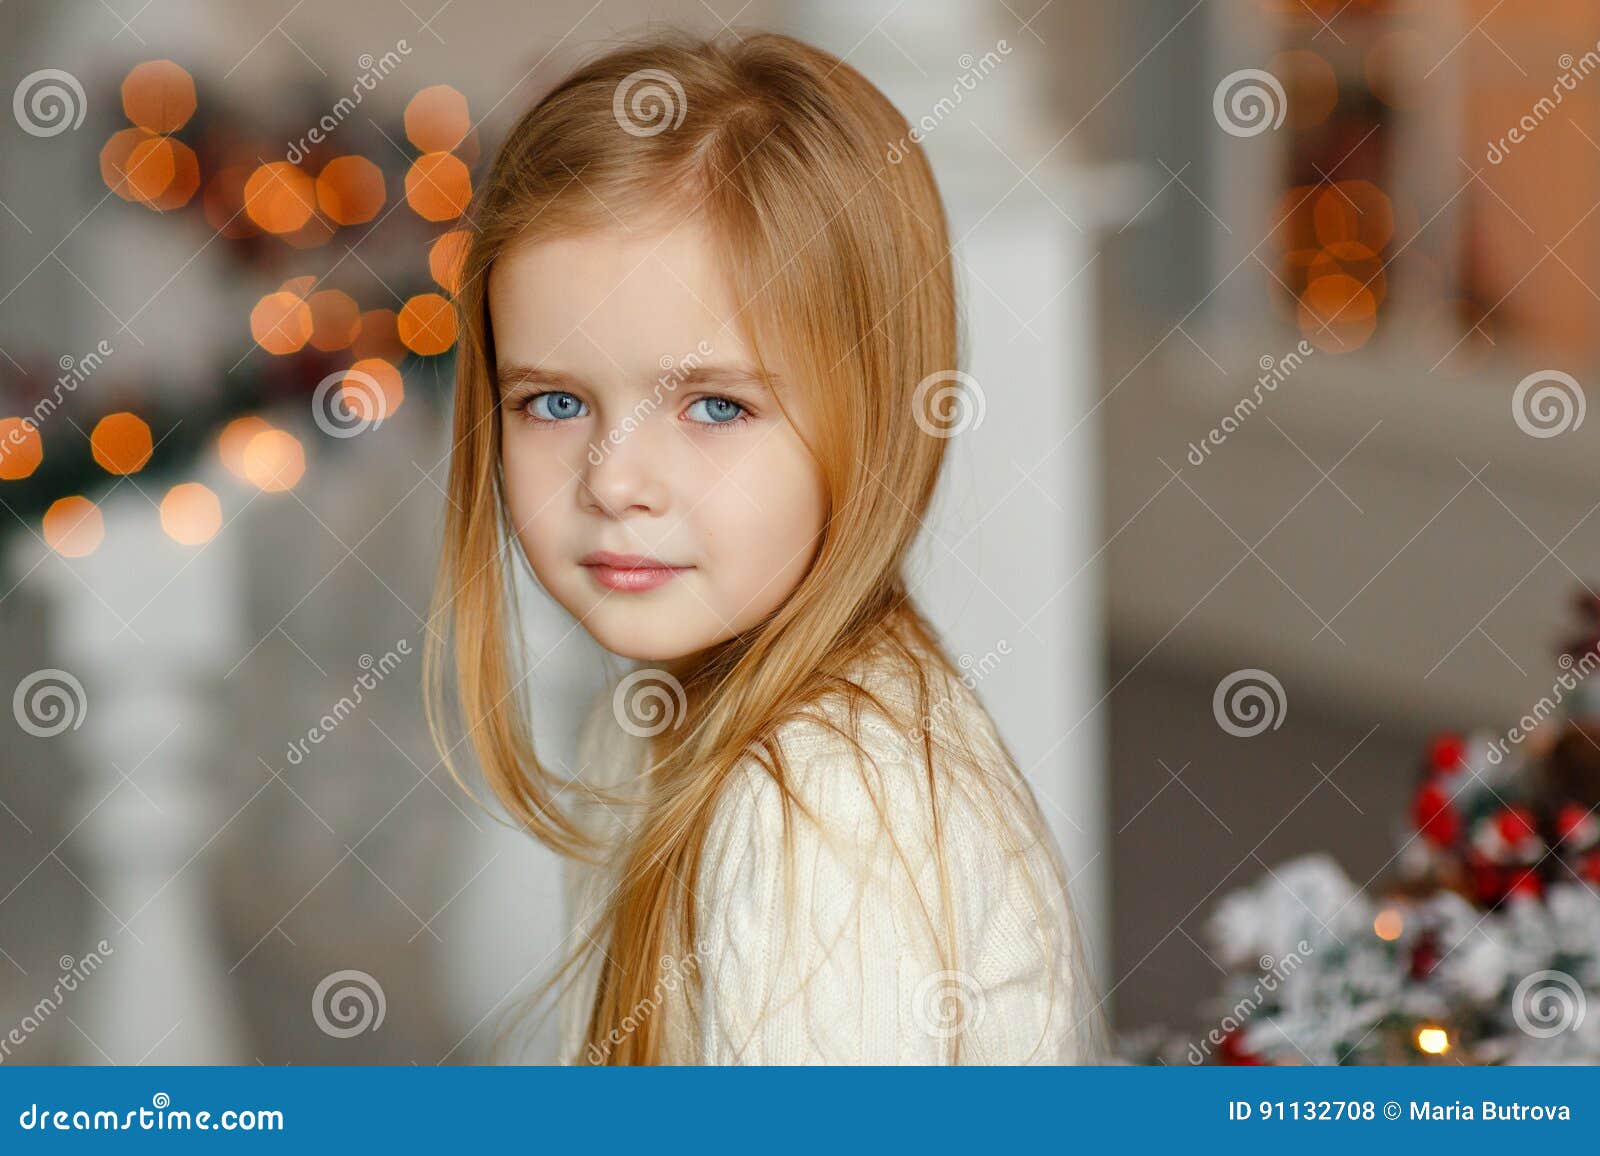 Beautiful Little Blond Girl With Blue Eyes Smiling At The New Ye